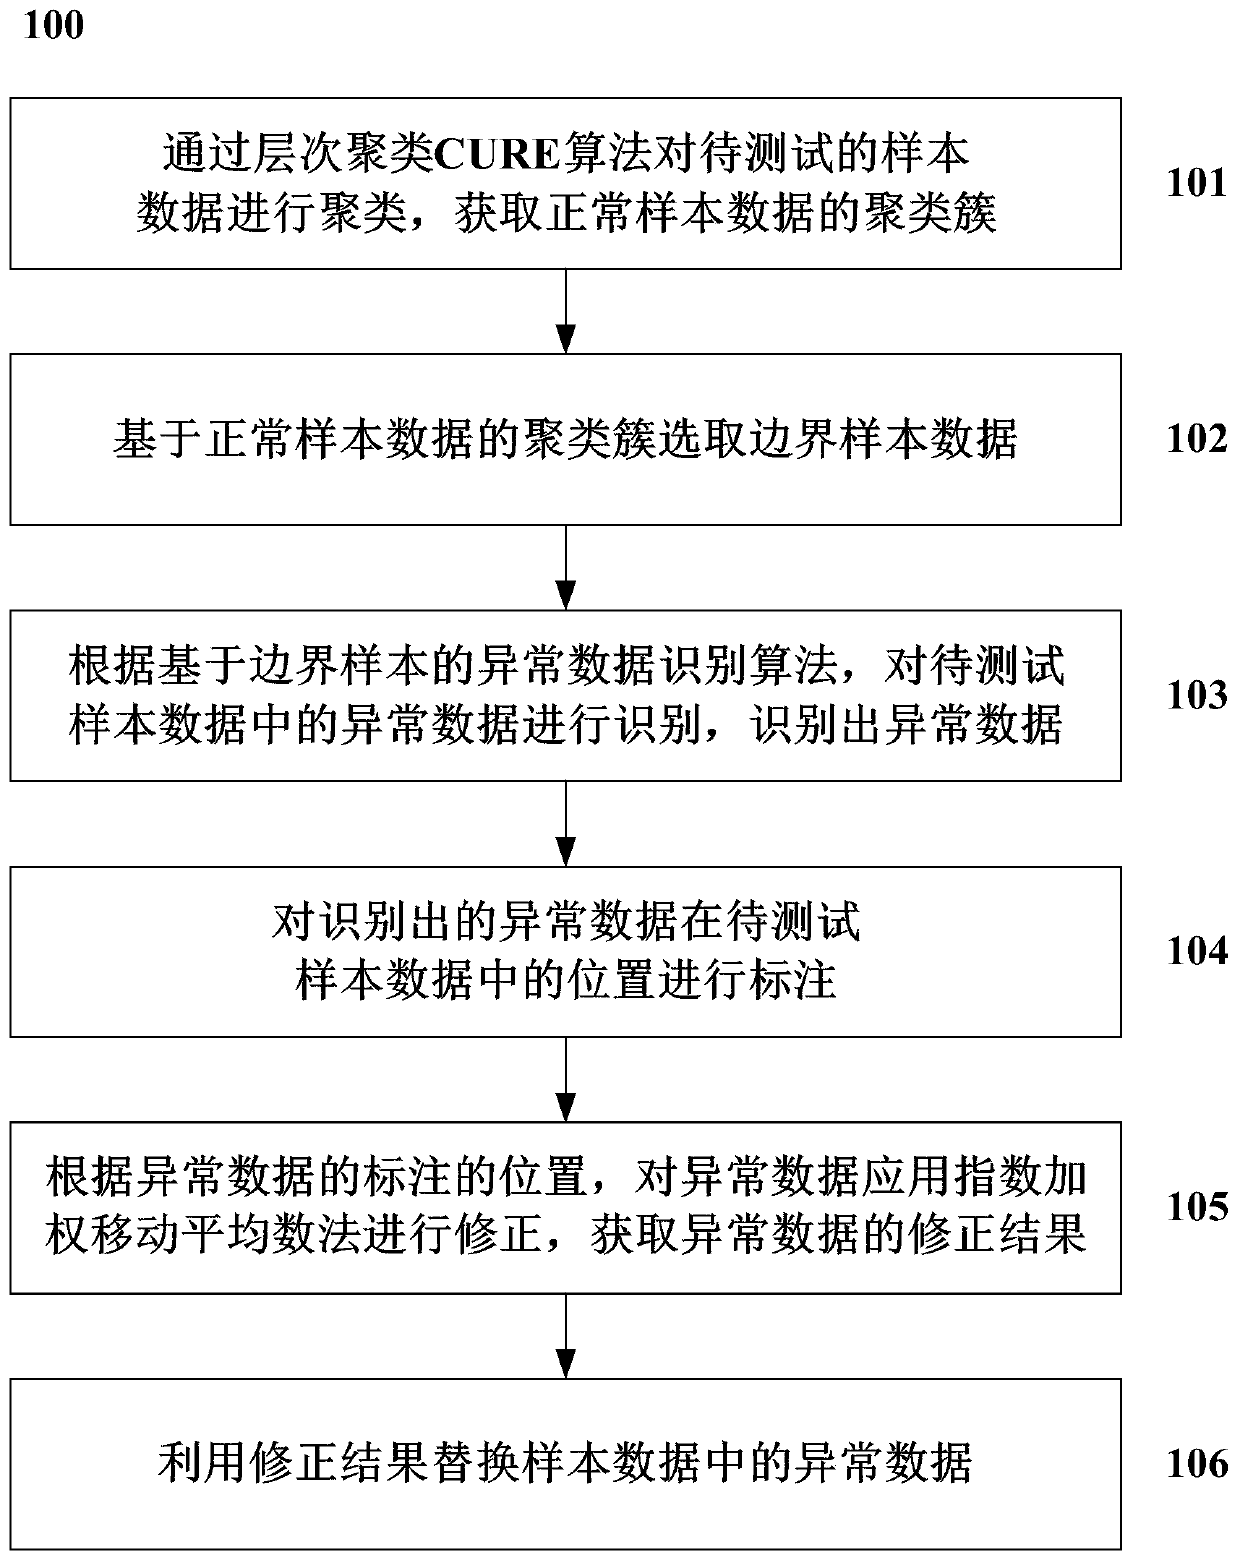 Method and system for cleaning power transmission and transformation reliability evaluation big data